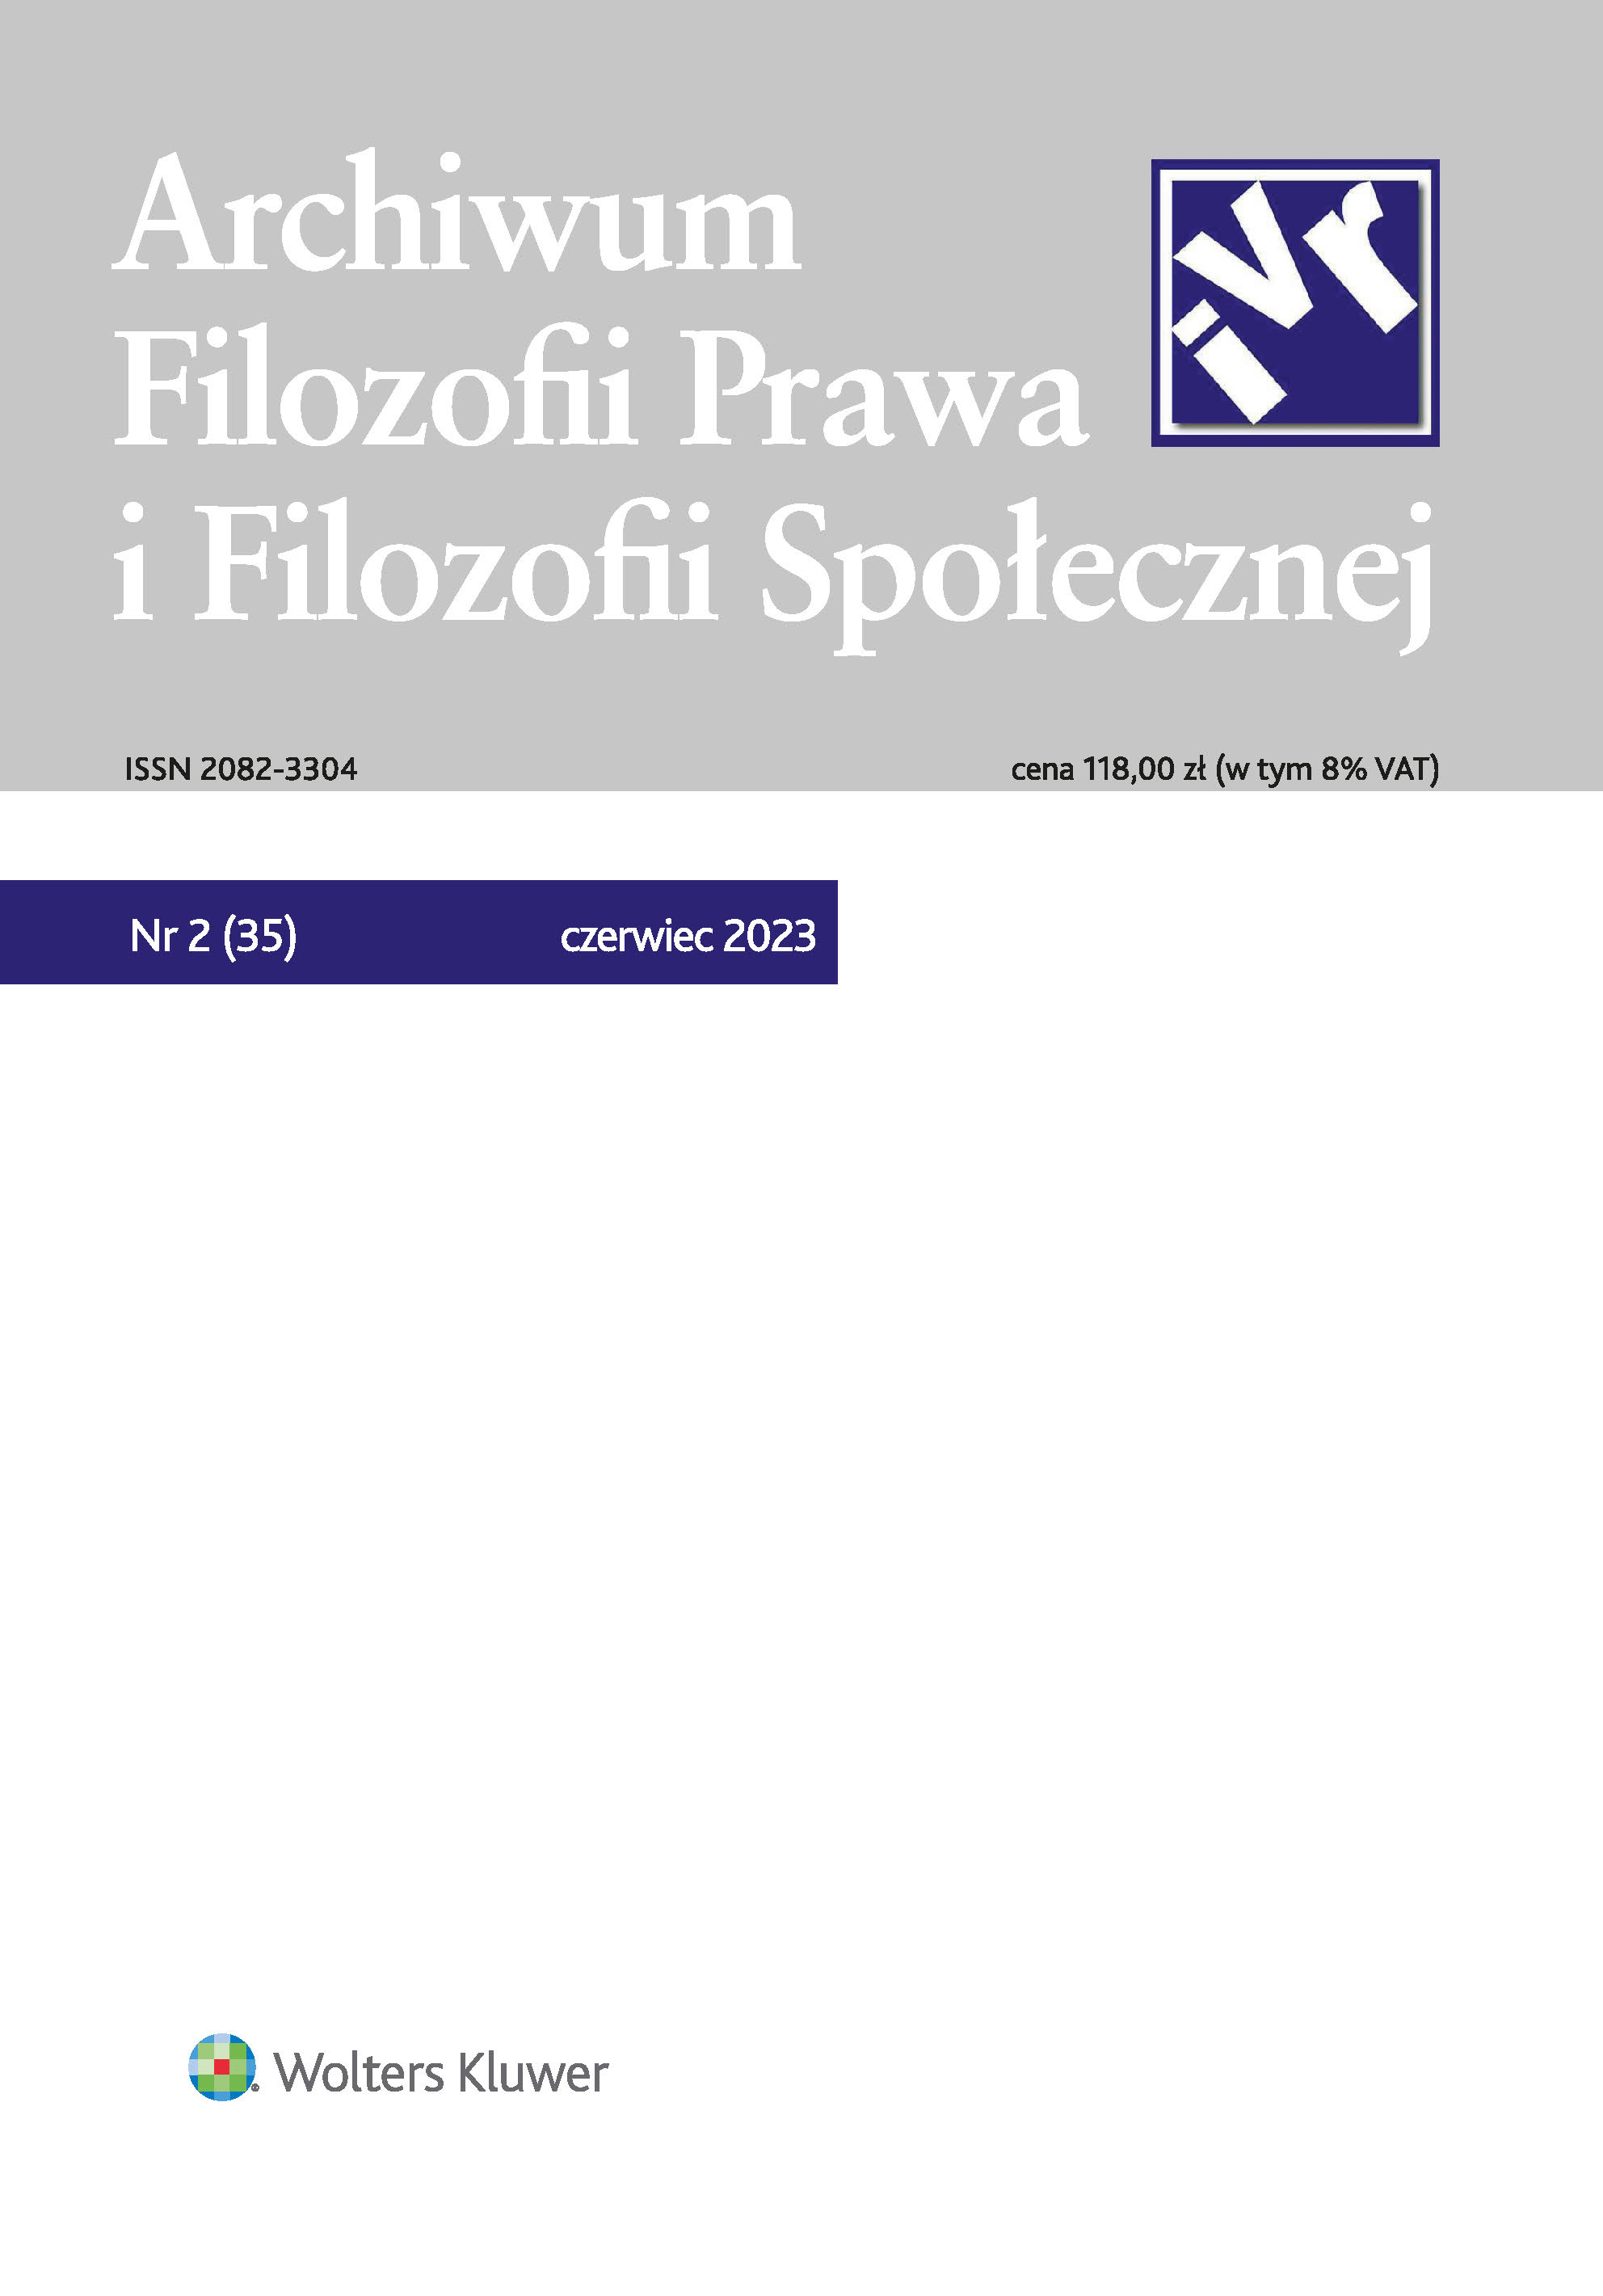 Law and Values Other Than Moral Ones:
On Searching for Tropes in Józef Nowacki’s Works Cover Image